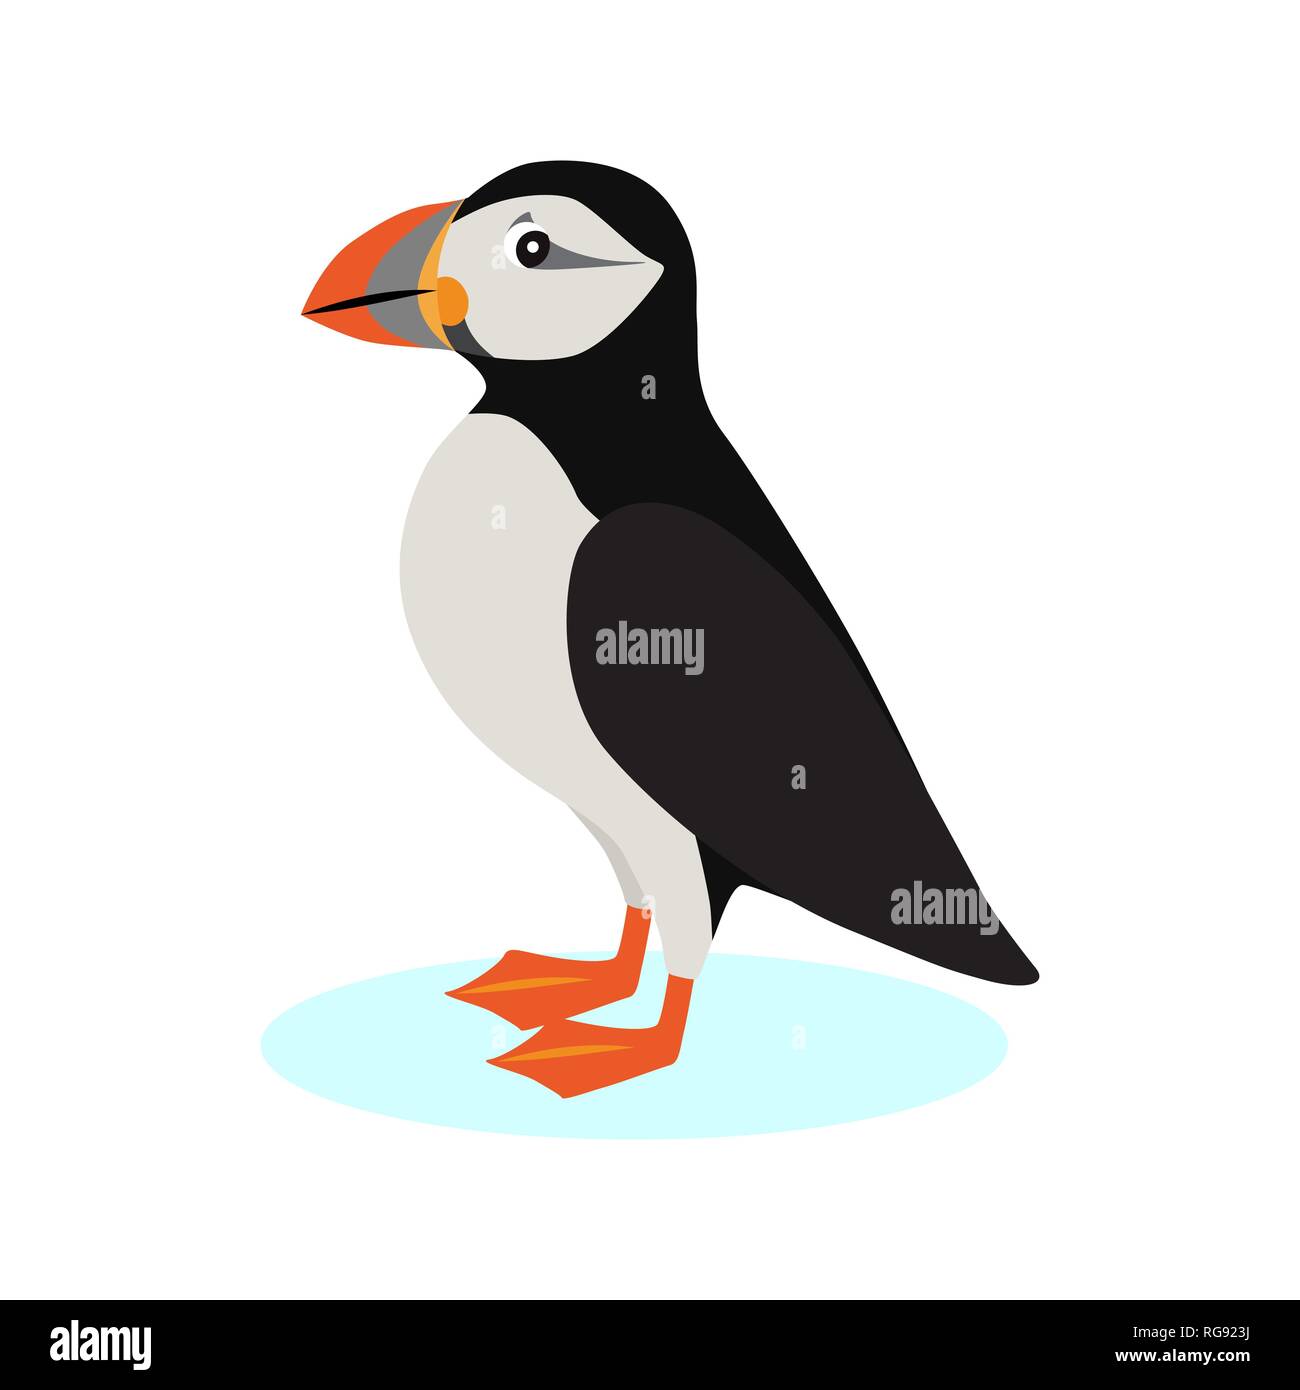 Atlantic puffin icon, polar bird with colorful beak isolated on white background, species of seabird, vector illustration. Stock Vector